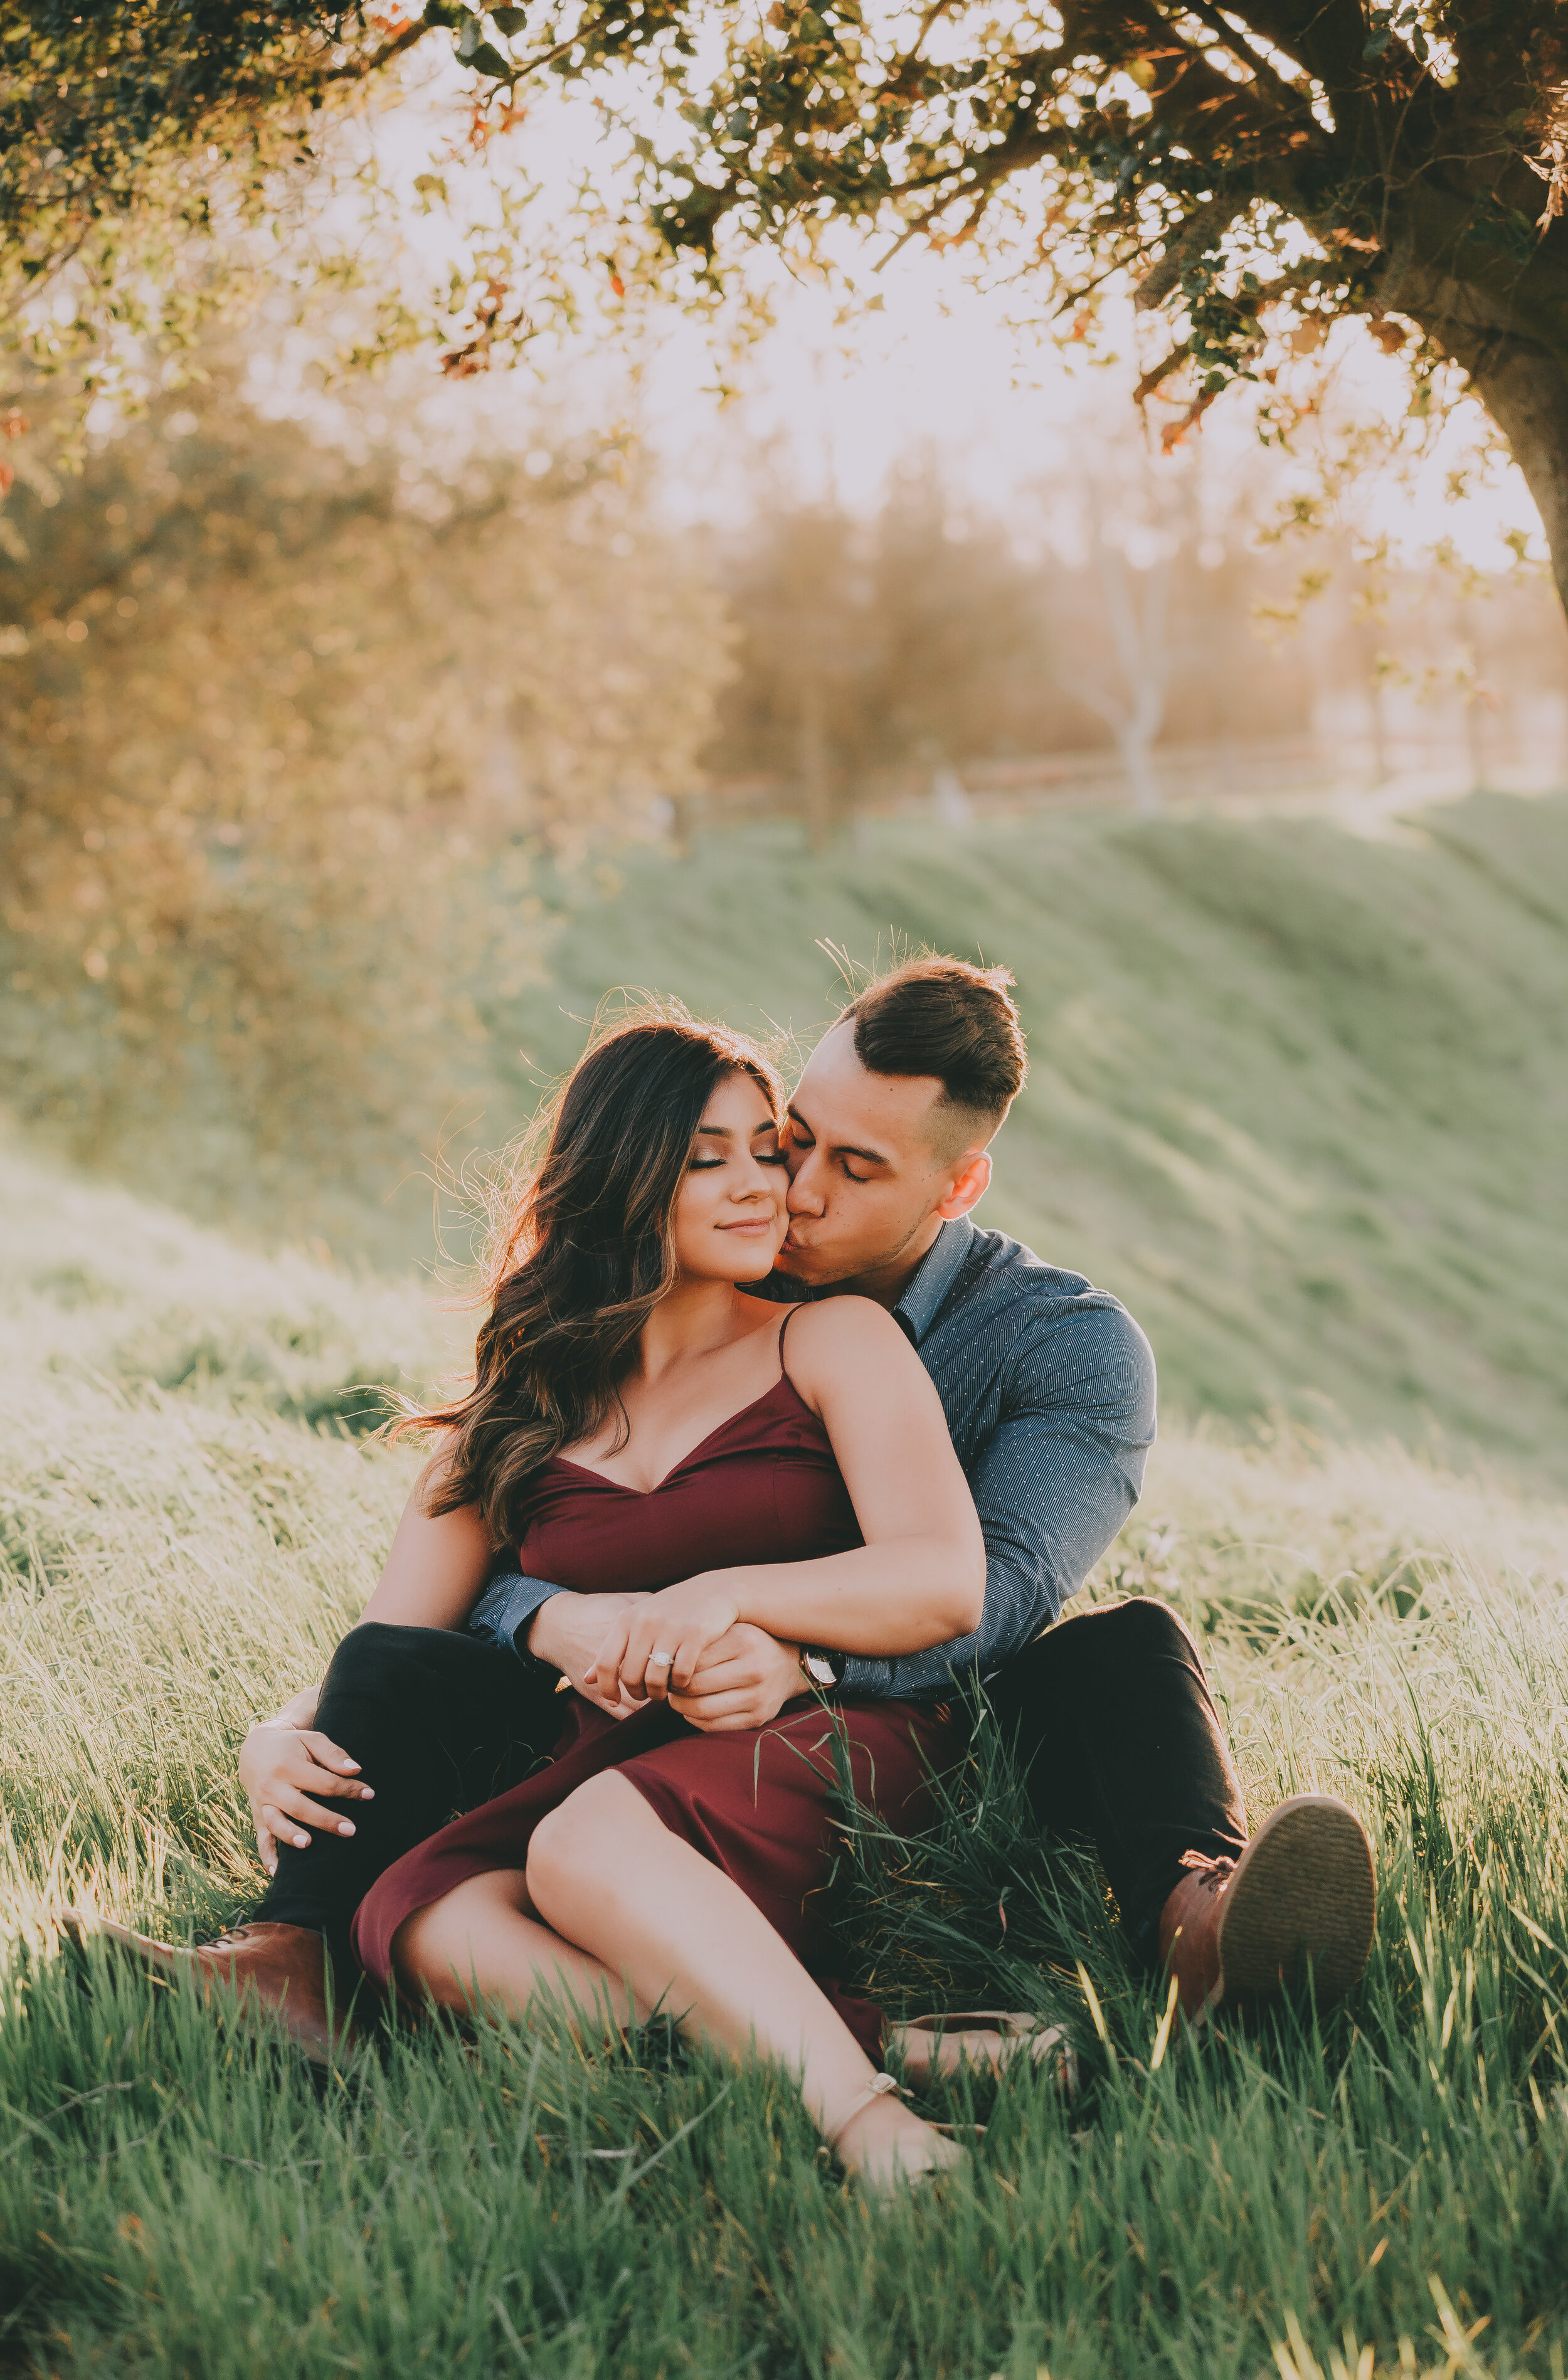 Fresno Engagament Photos - The Clausen Gallery - Samantha and Jesus-22.jpg